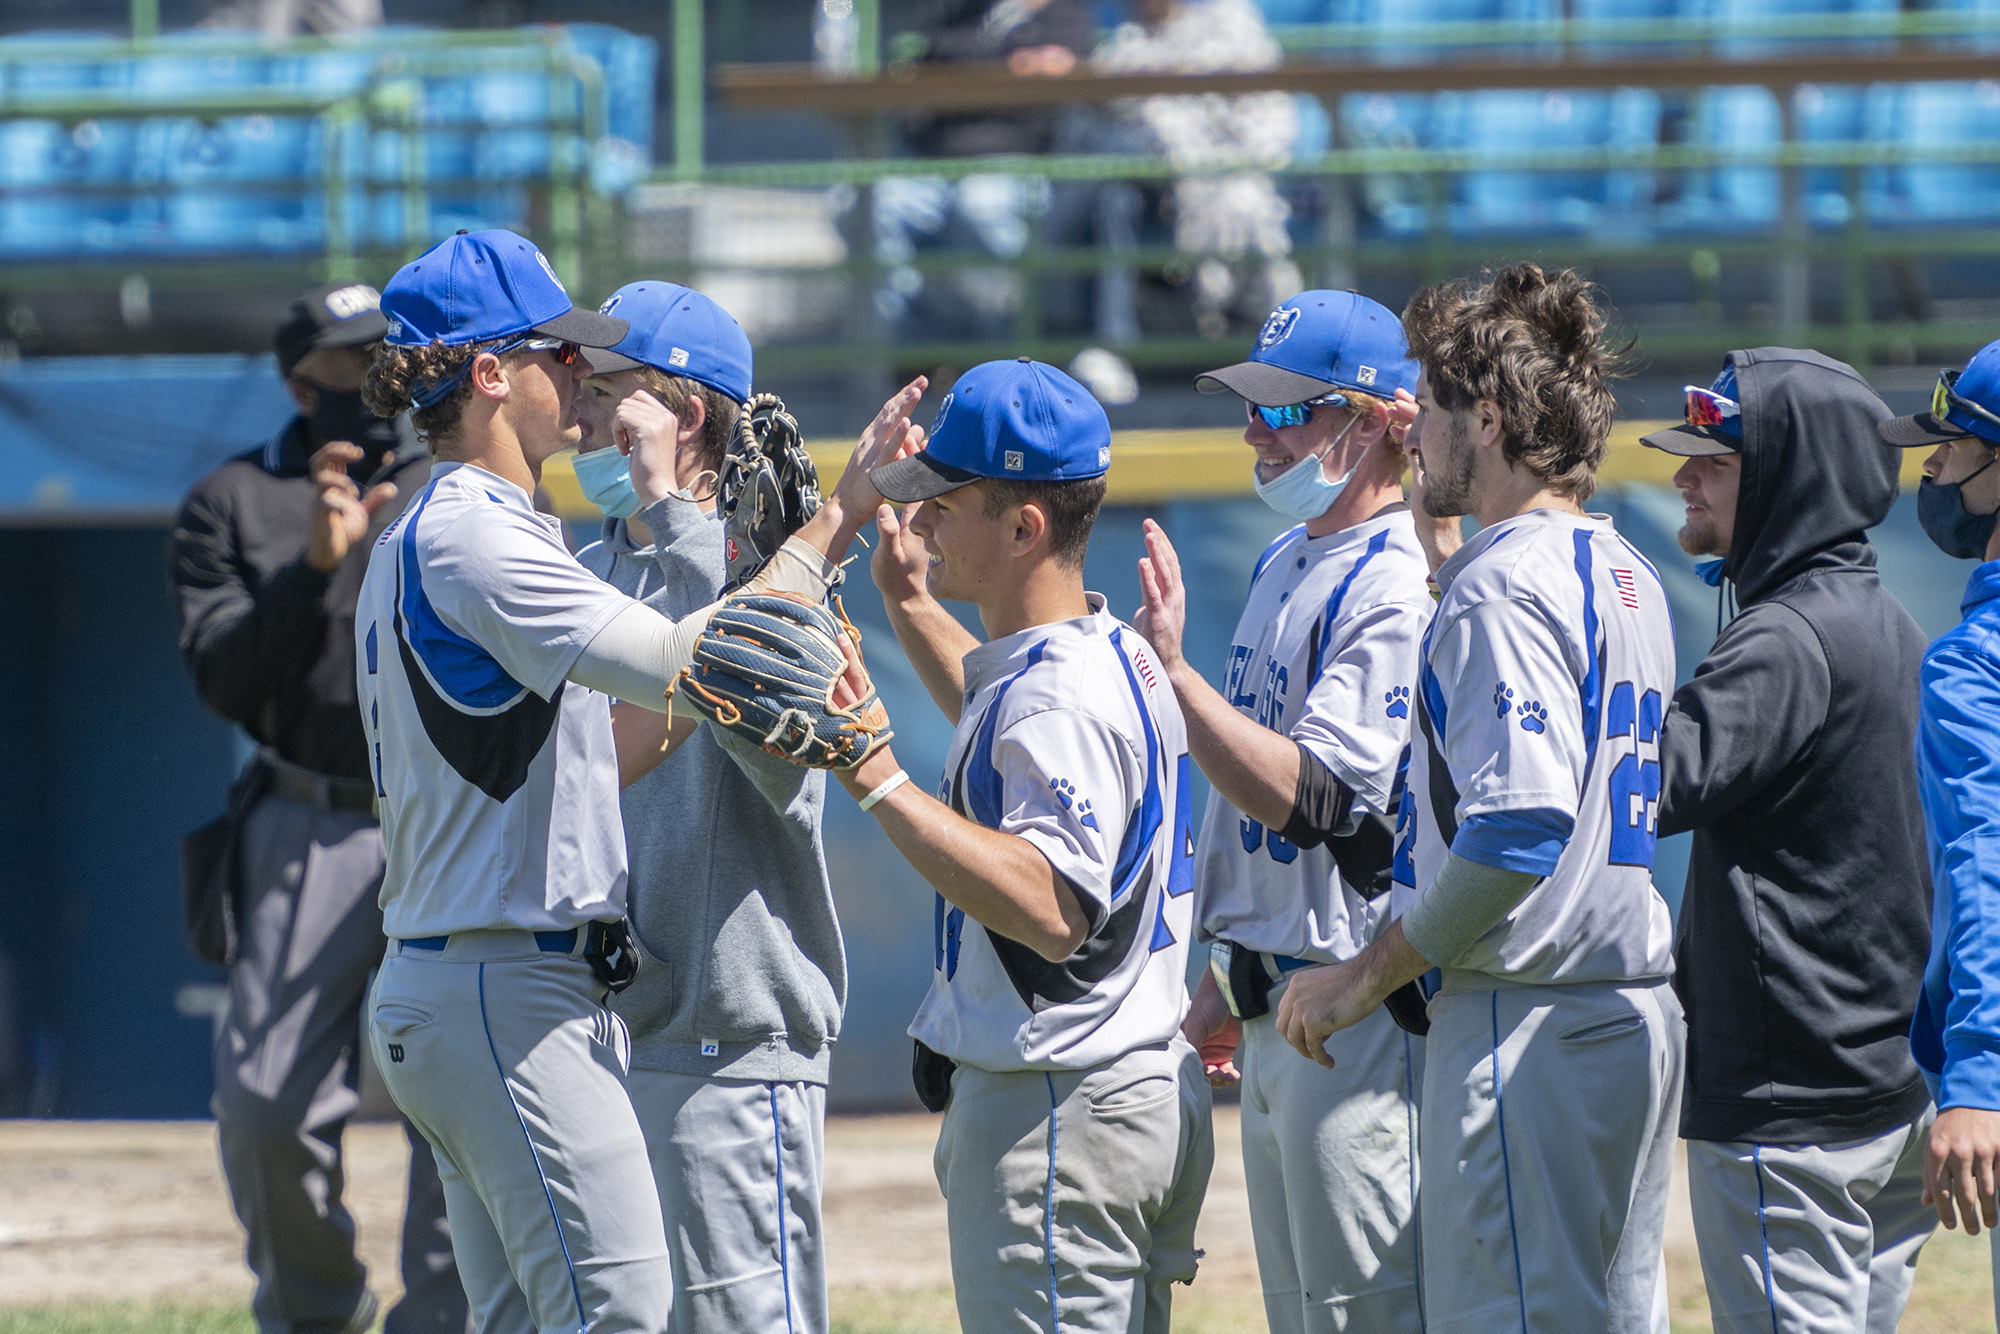 KCC baseball players high-five on the way to the dugout during a game.